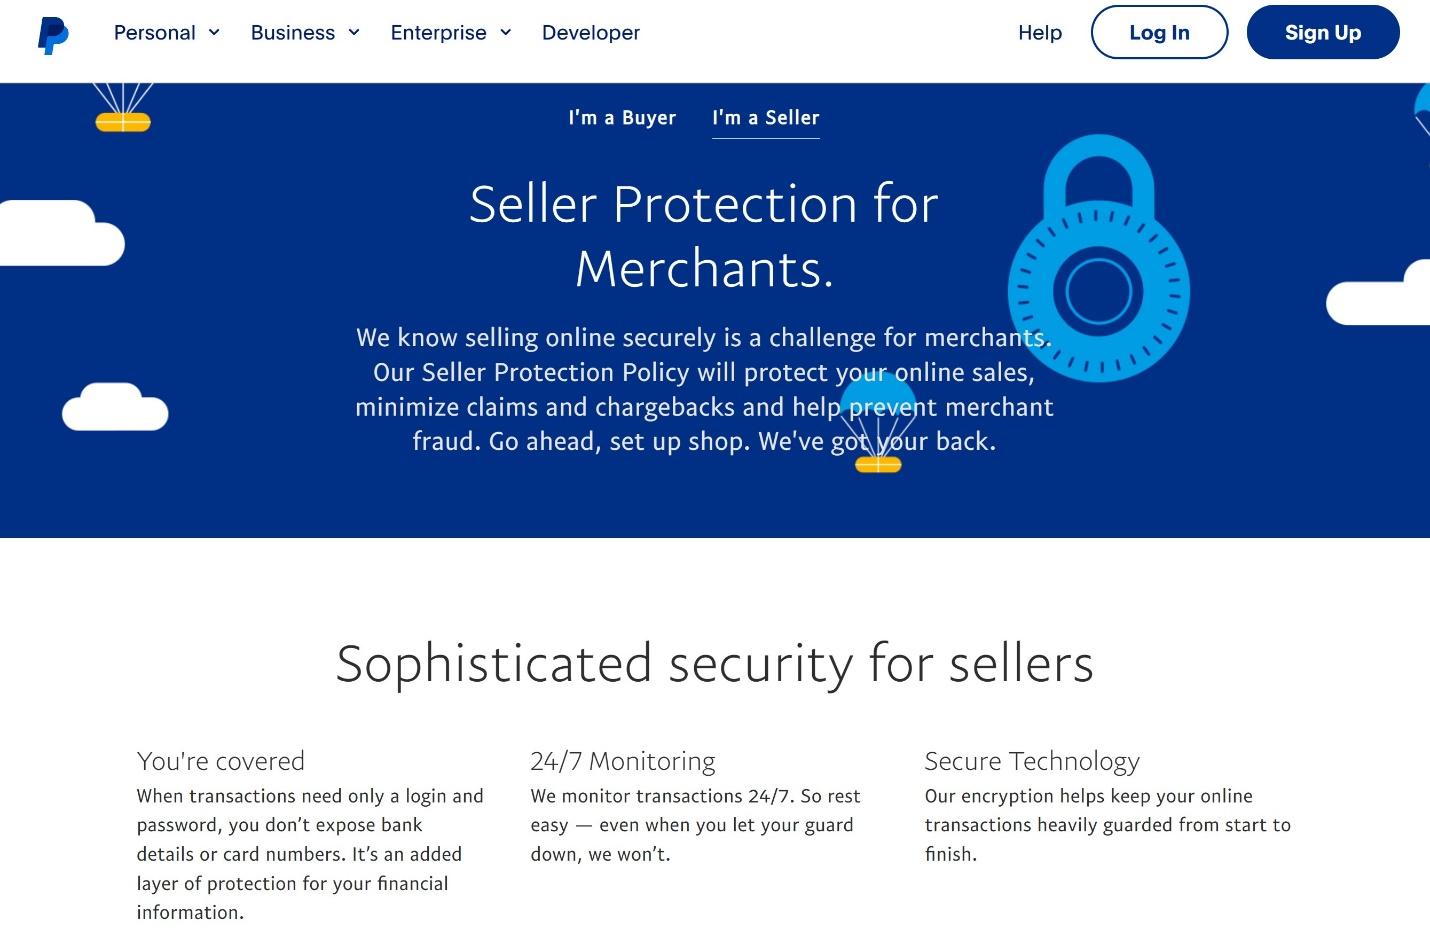 PayPal security and seller protection services.